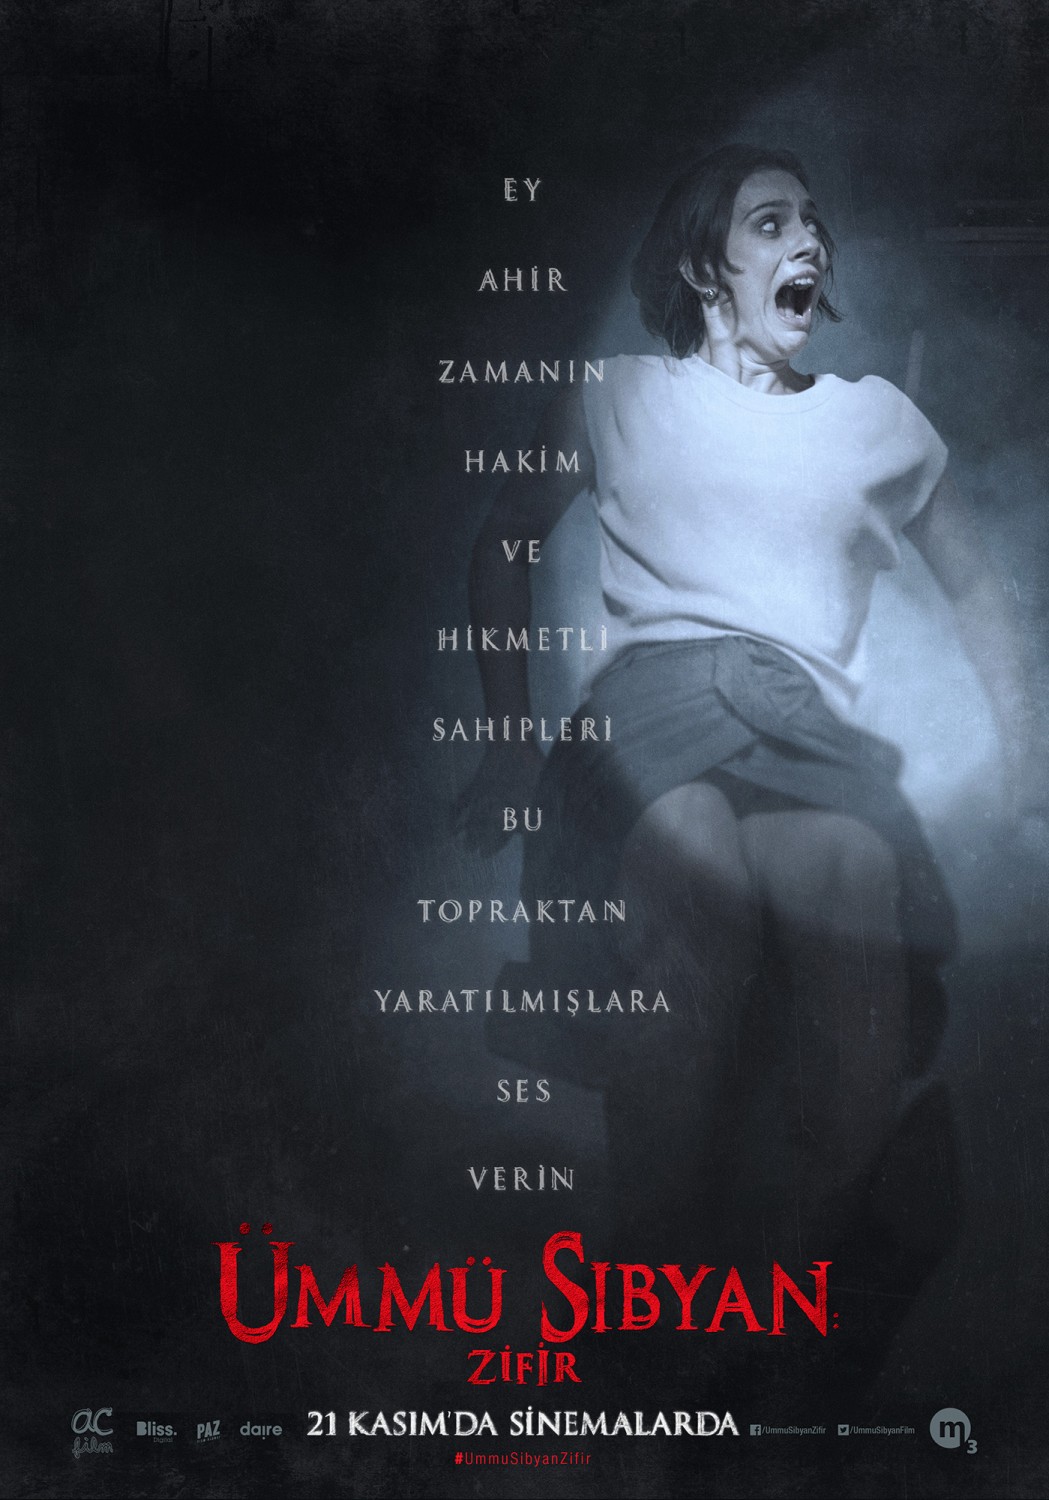 Extra Large Movie Poster Image for Ümmü Sıbyan Zifir (#10 of 12)